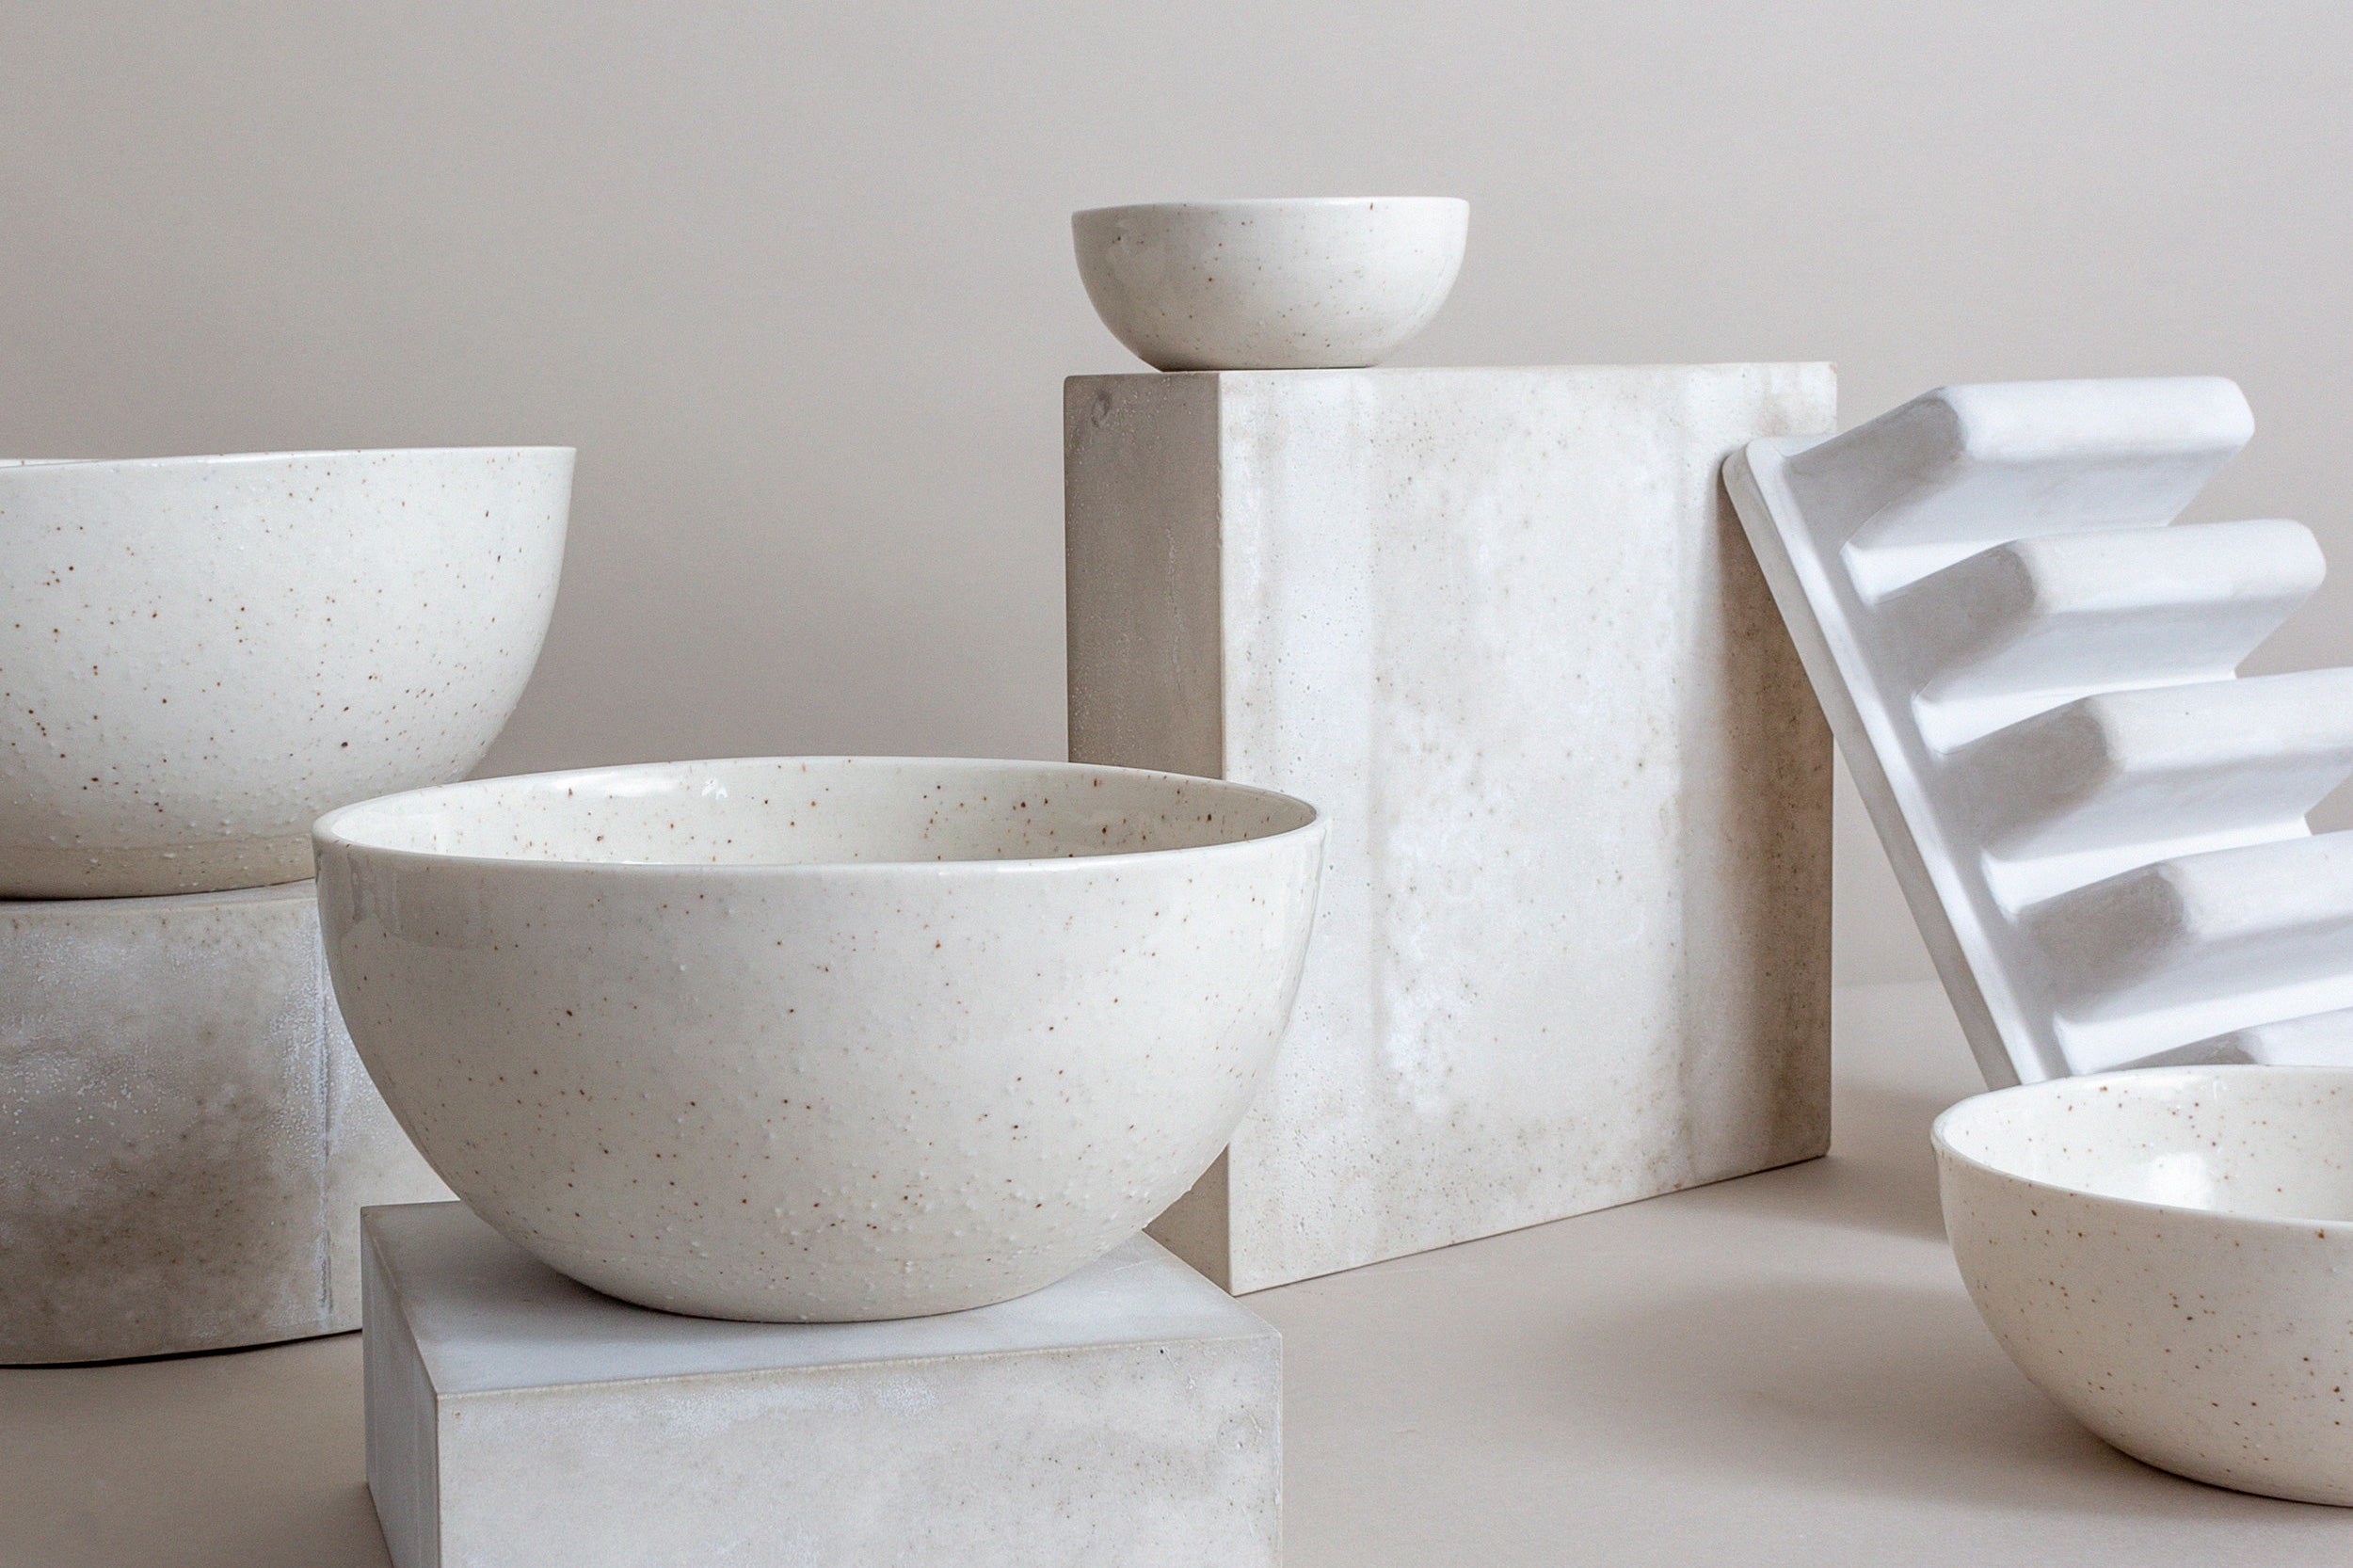 Andrew Molleur-Speckled Bowls